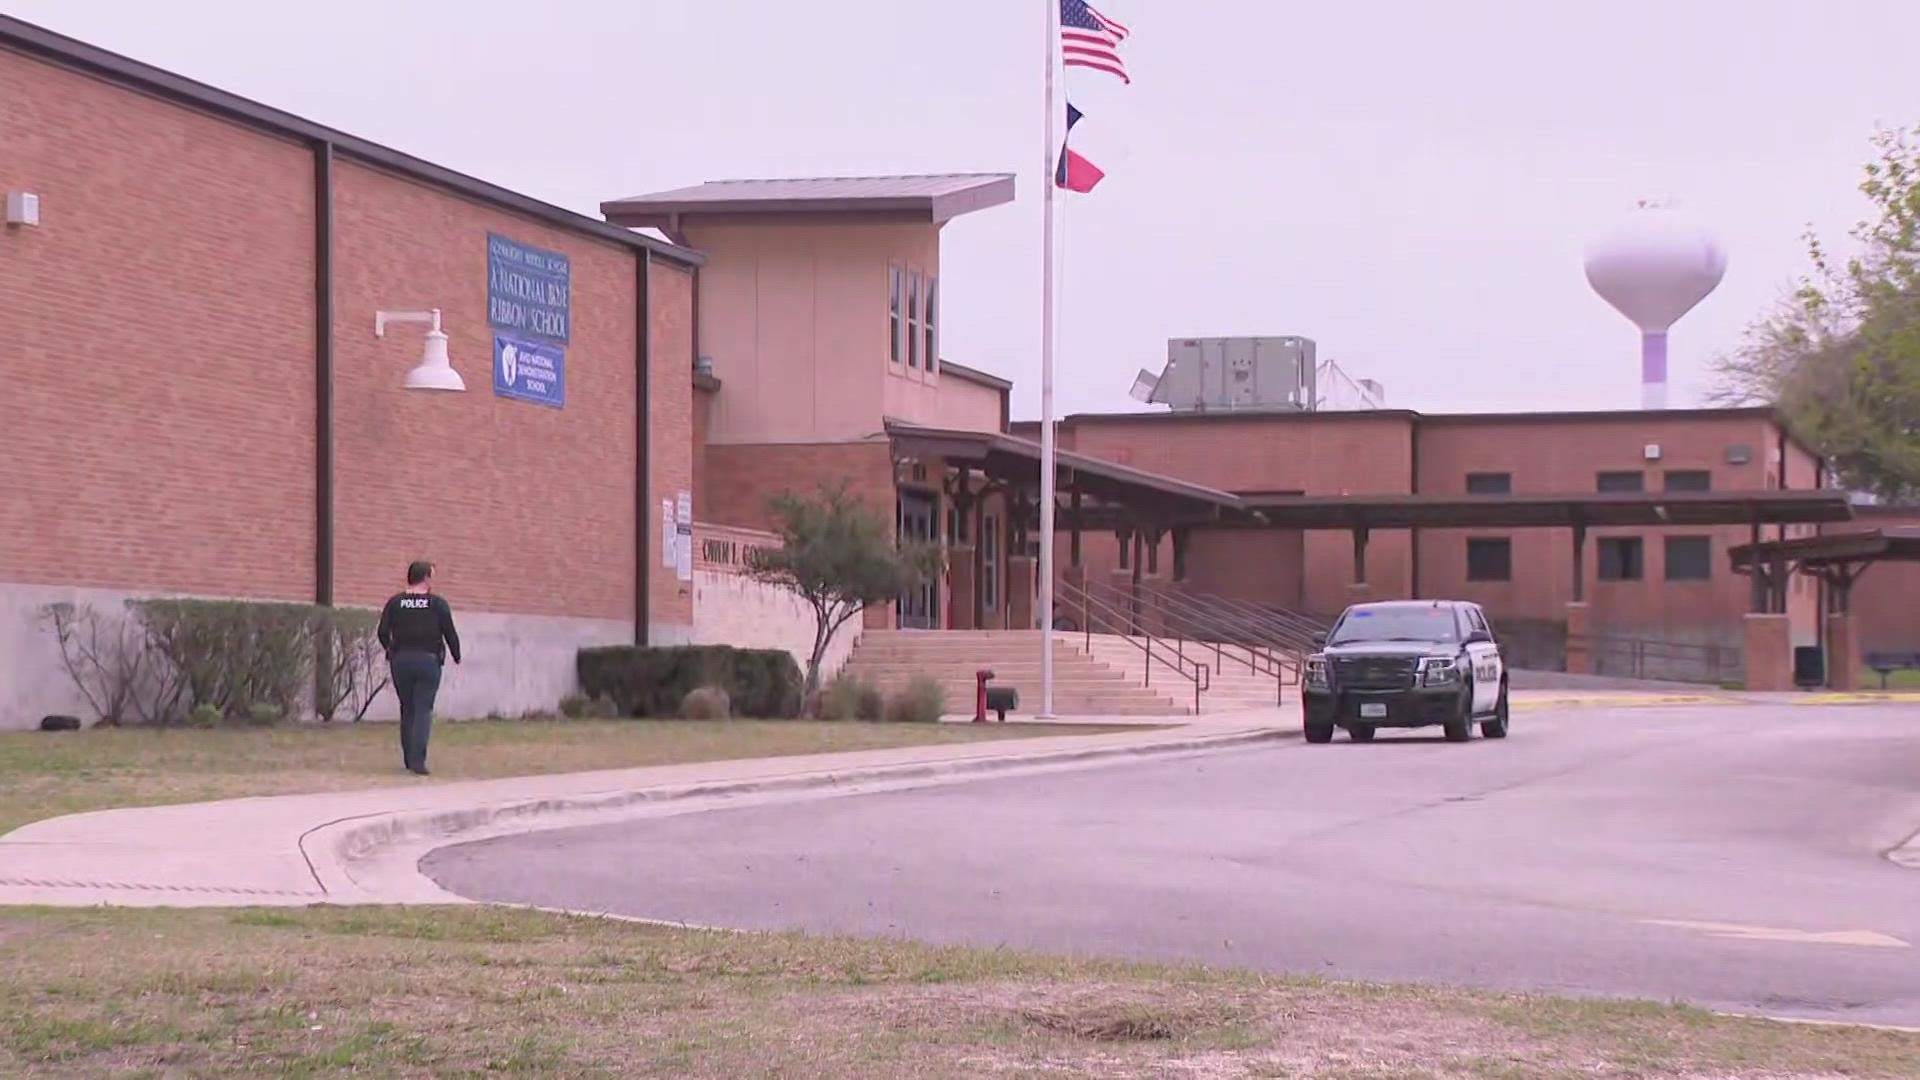 A San Marcos middle school is in the process of dealing with a "medical emergency" that occurred in the parking lot Friday morning.